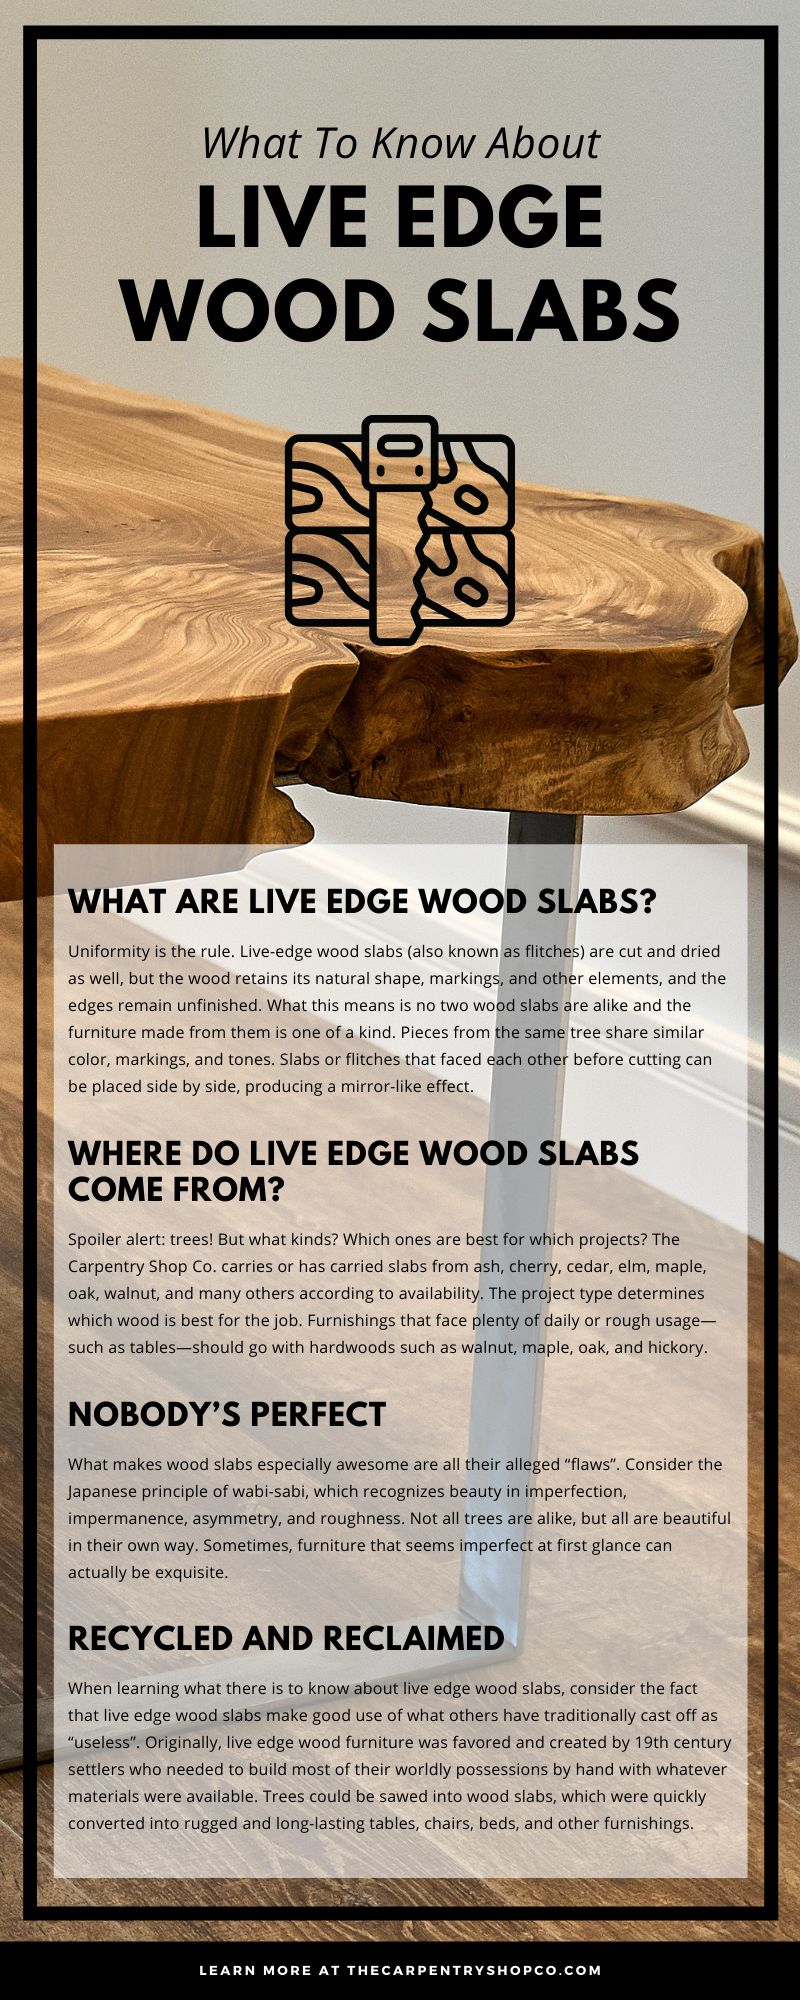 What To Know About Live Edge Wood Slabs